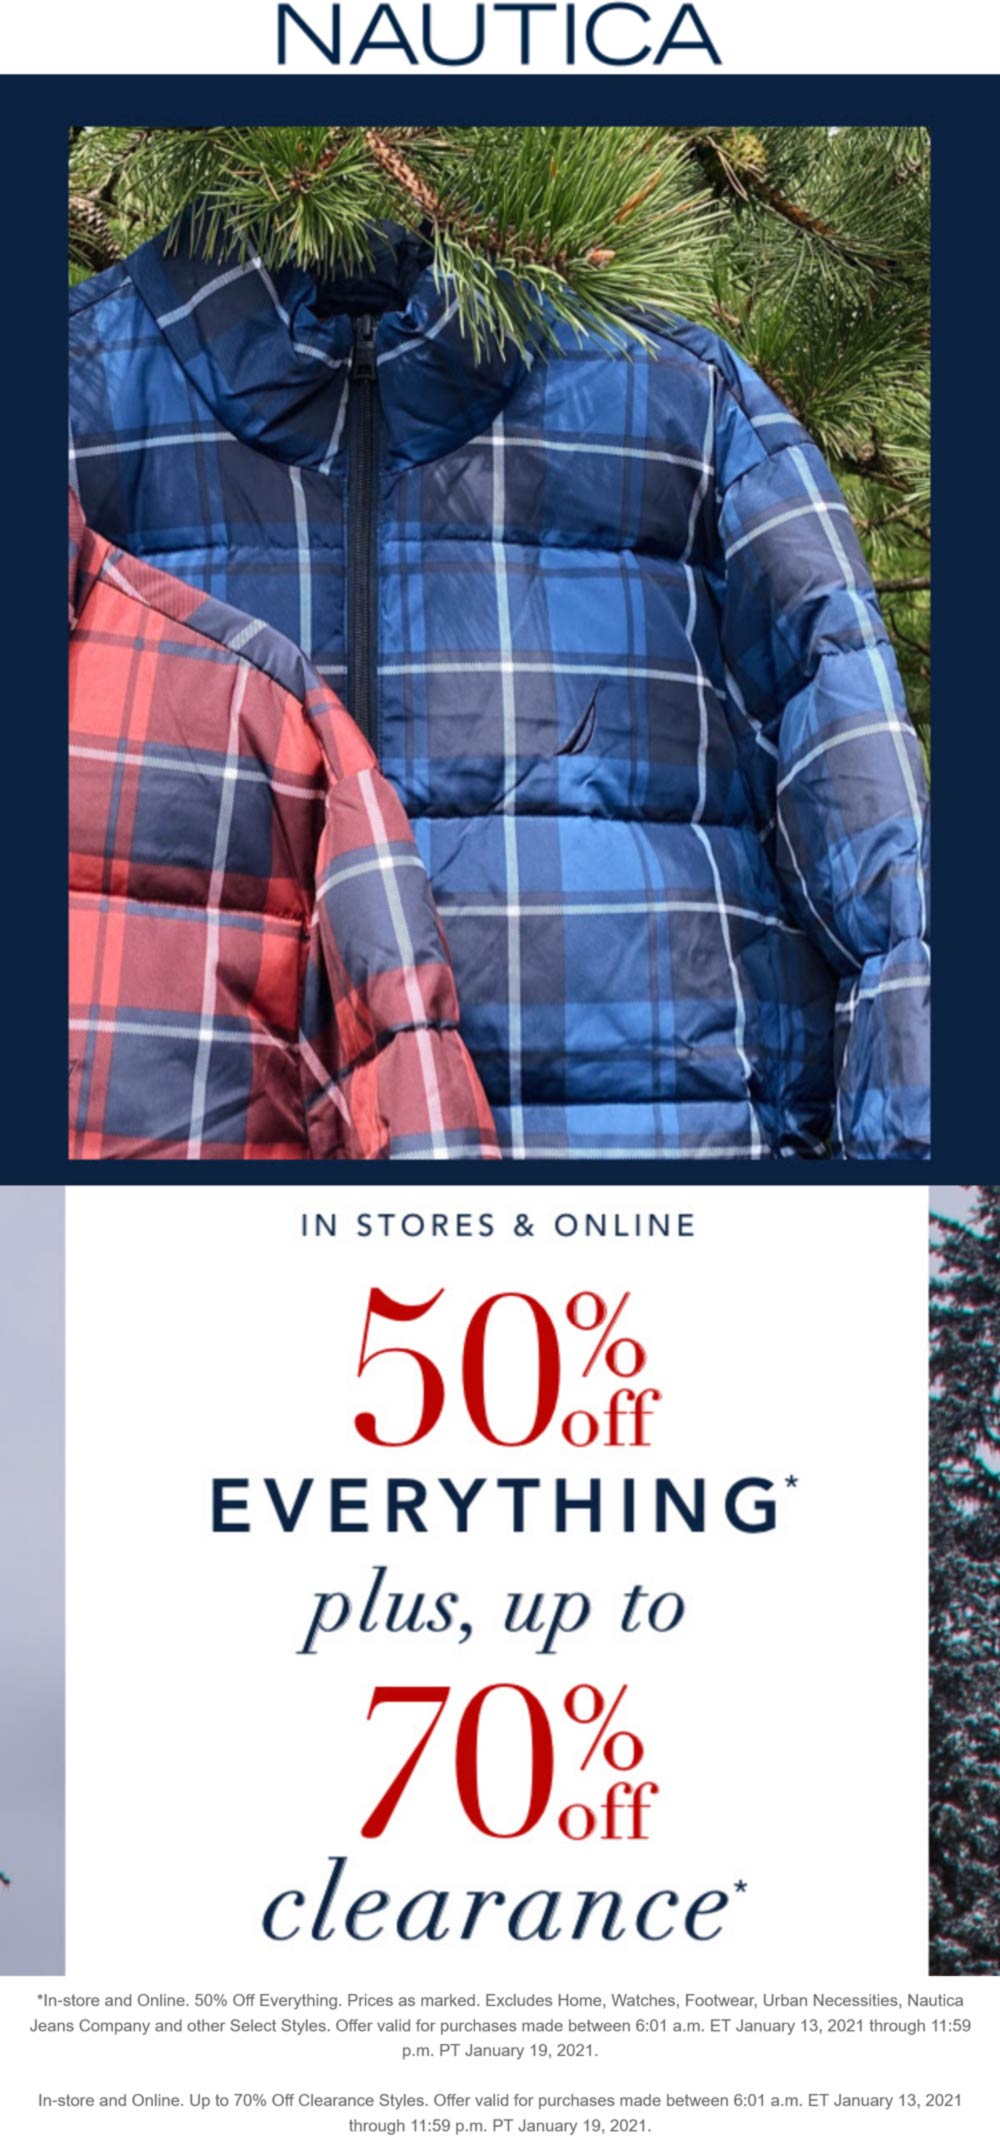 Nautica stores Coupon  50% off everything & more at Nautica, ditto online #nautica 